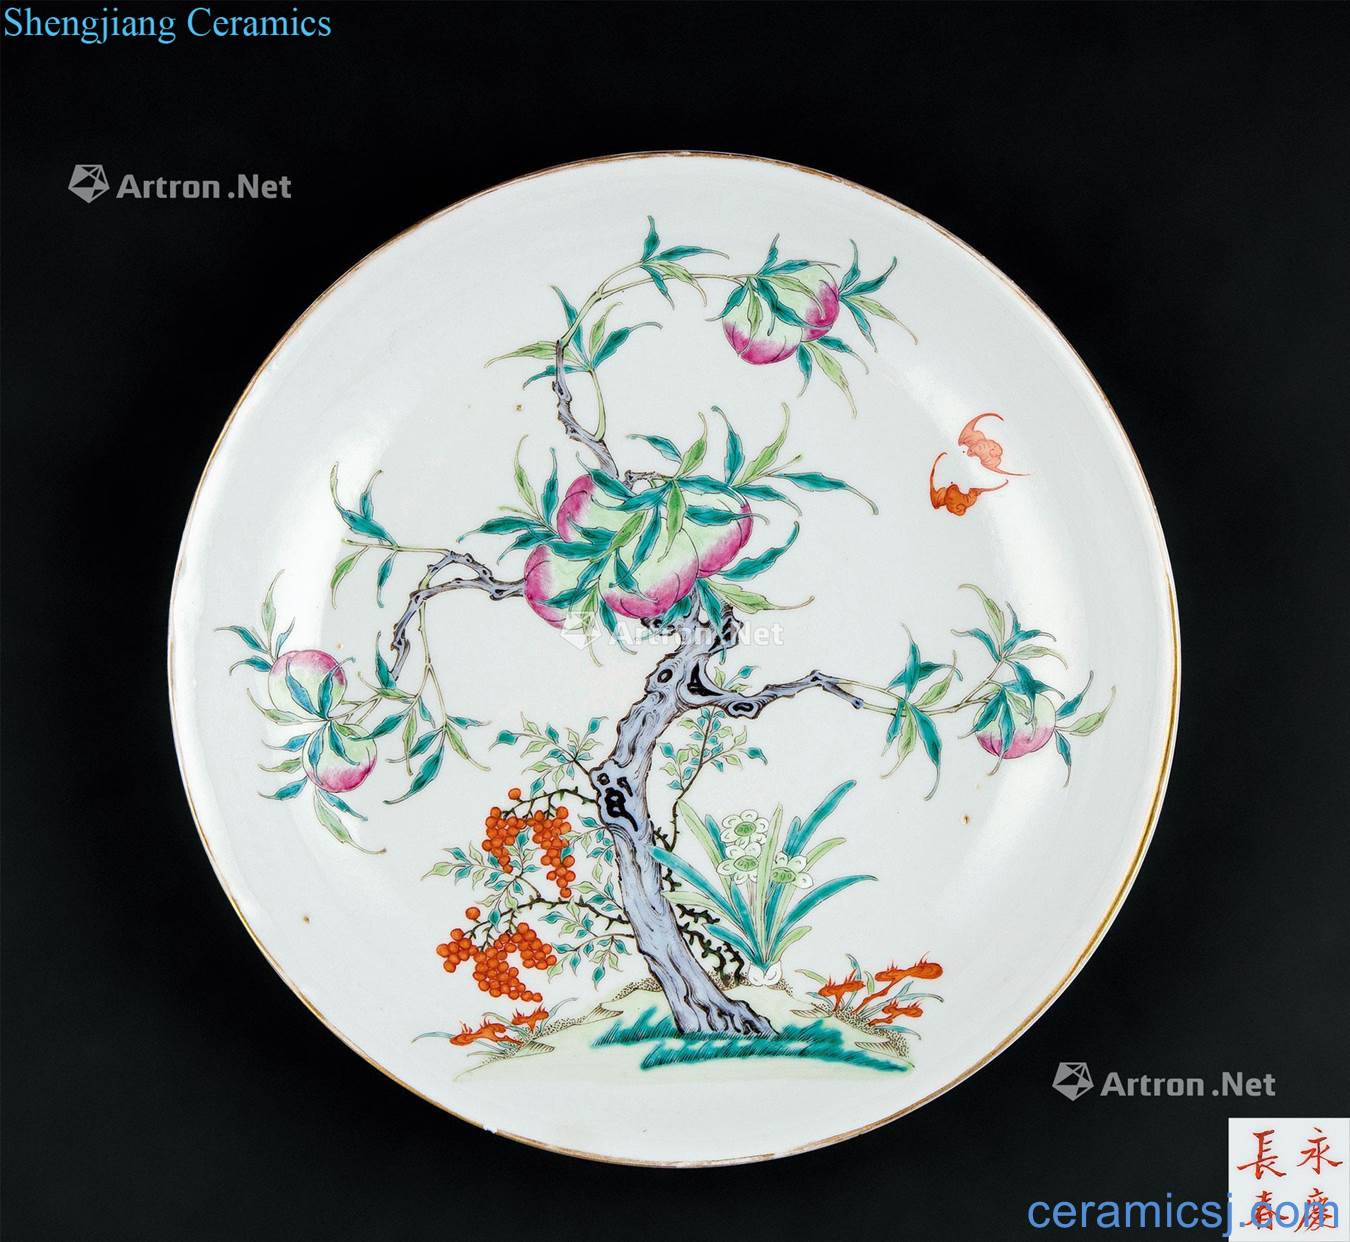 In the qing dynasty (1644-1911), a pastel live tray